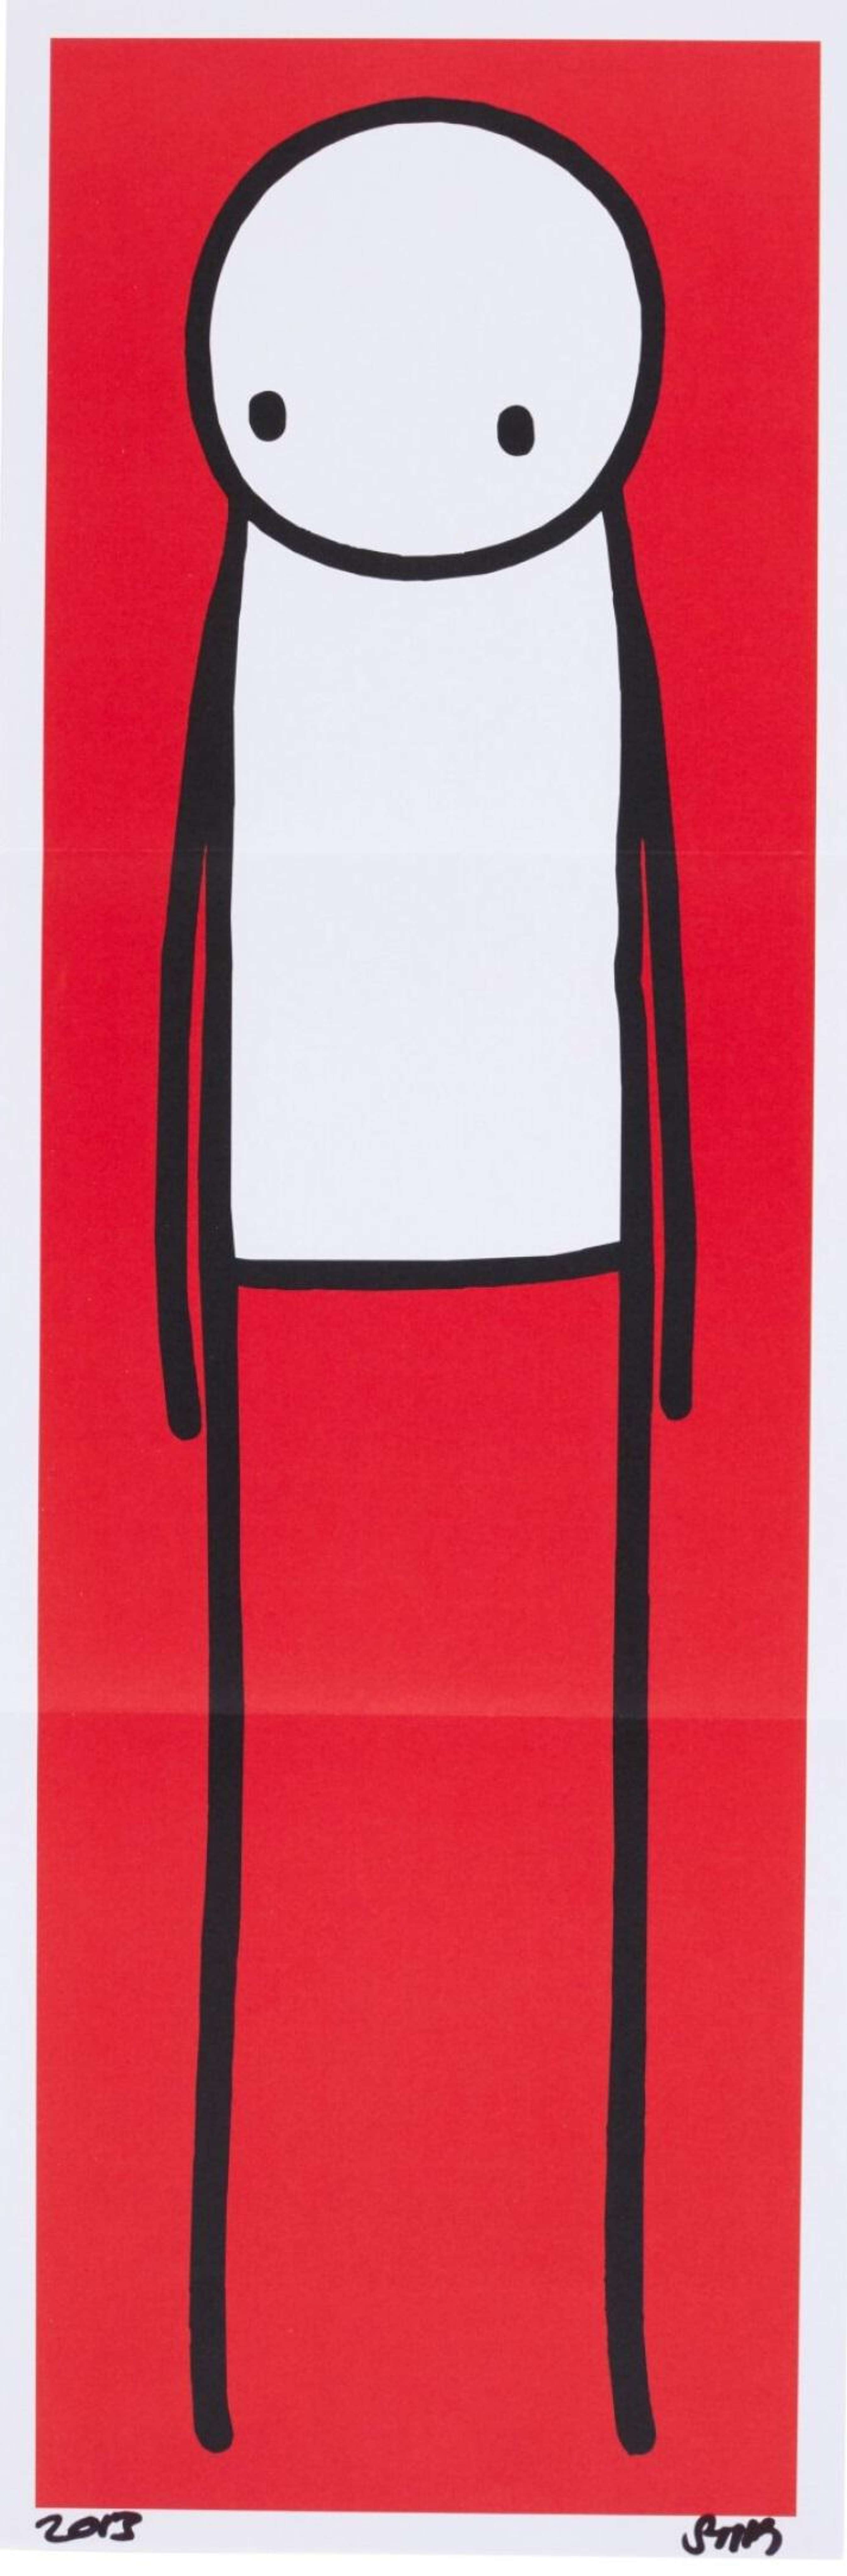 The Big Issue (red) - Signed Print